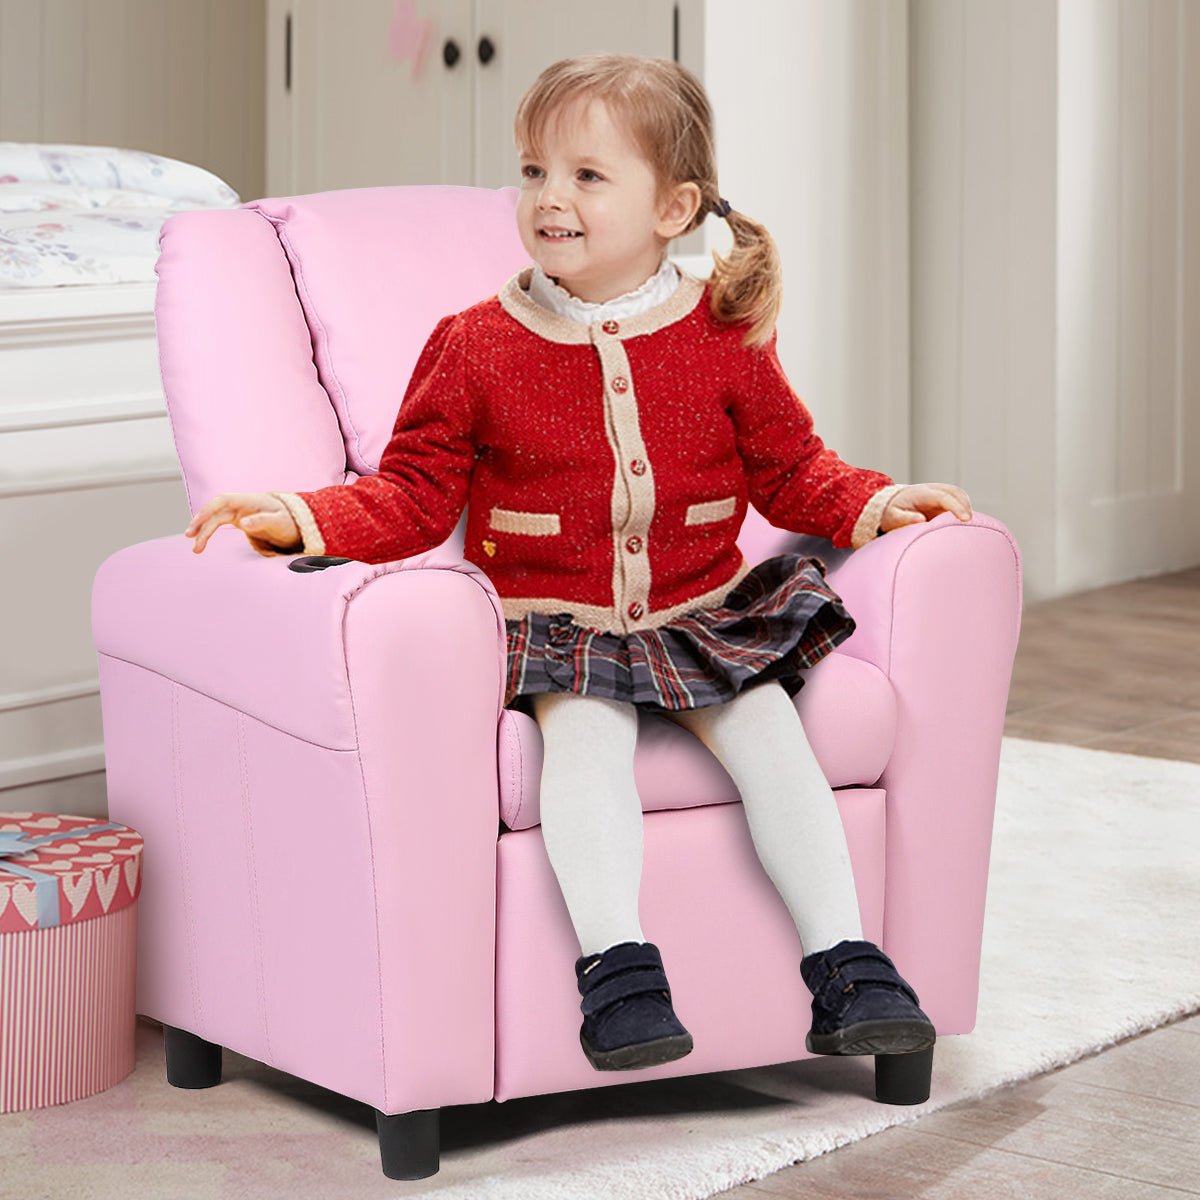 Comfortable Children's Recliner Chair with Pink Ergonomic Armrest: Relaxation Spot